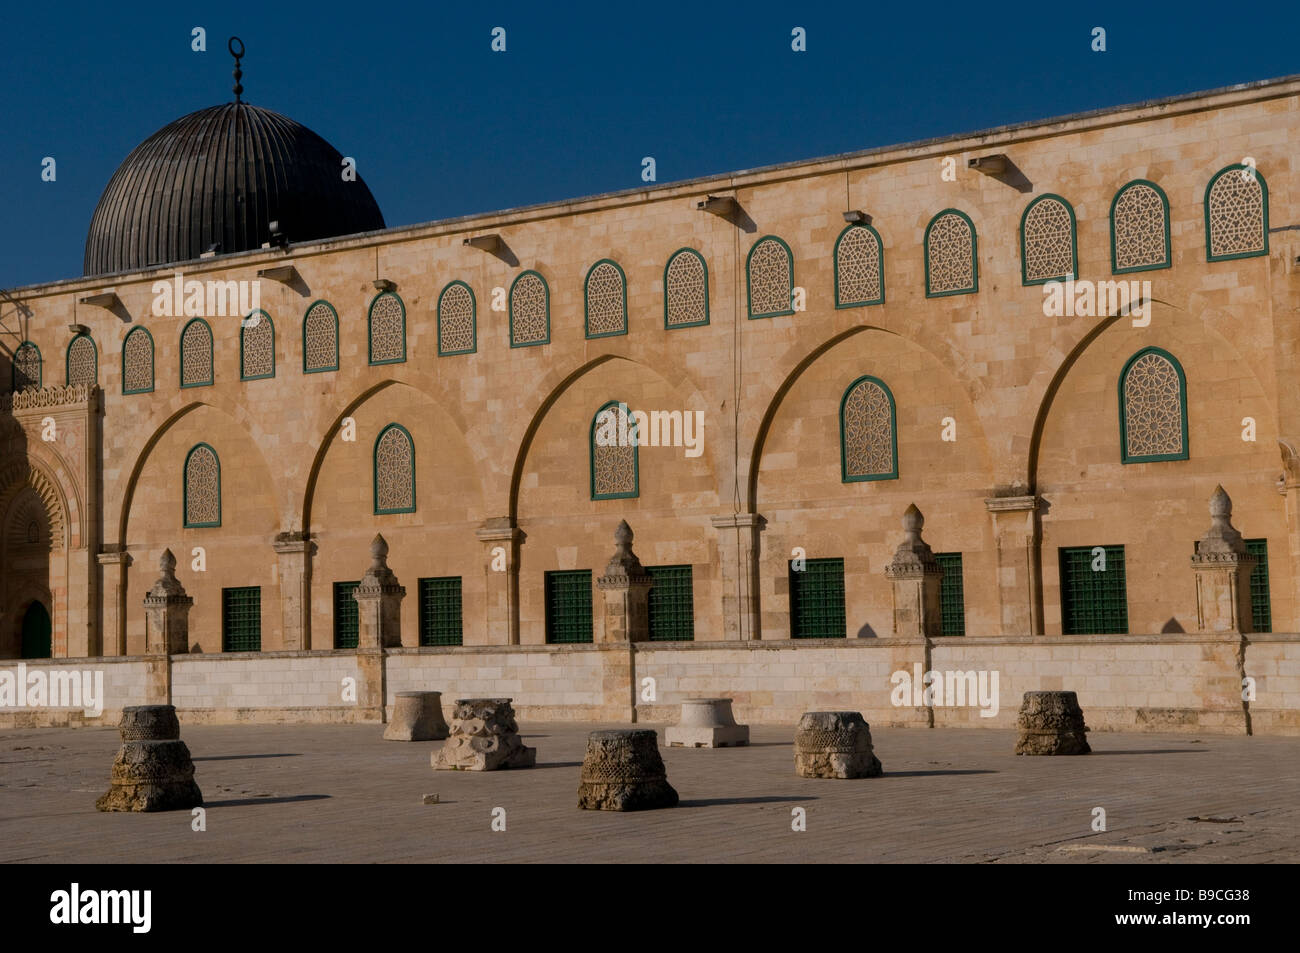 Side view of the Islamic shrine of El Aksa Mosque at the Temple Mount known as The Noble Sanctuary and to Muslims as the Haram esh-Sharif in Jerusalem Stock Photo